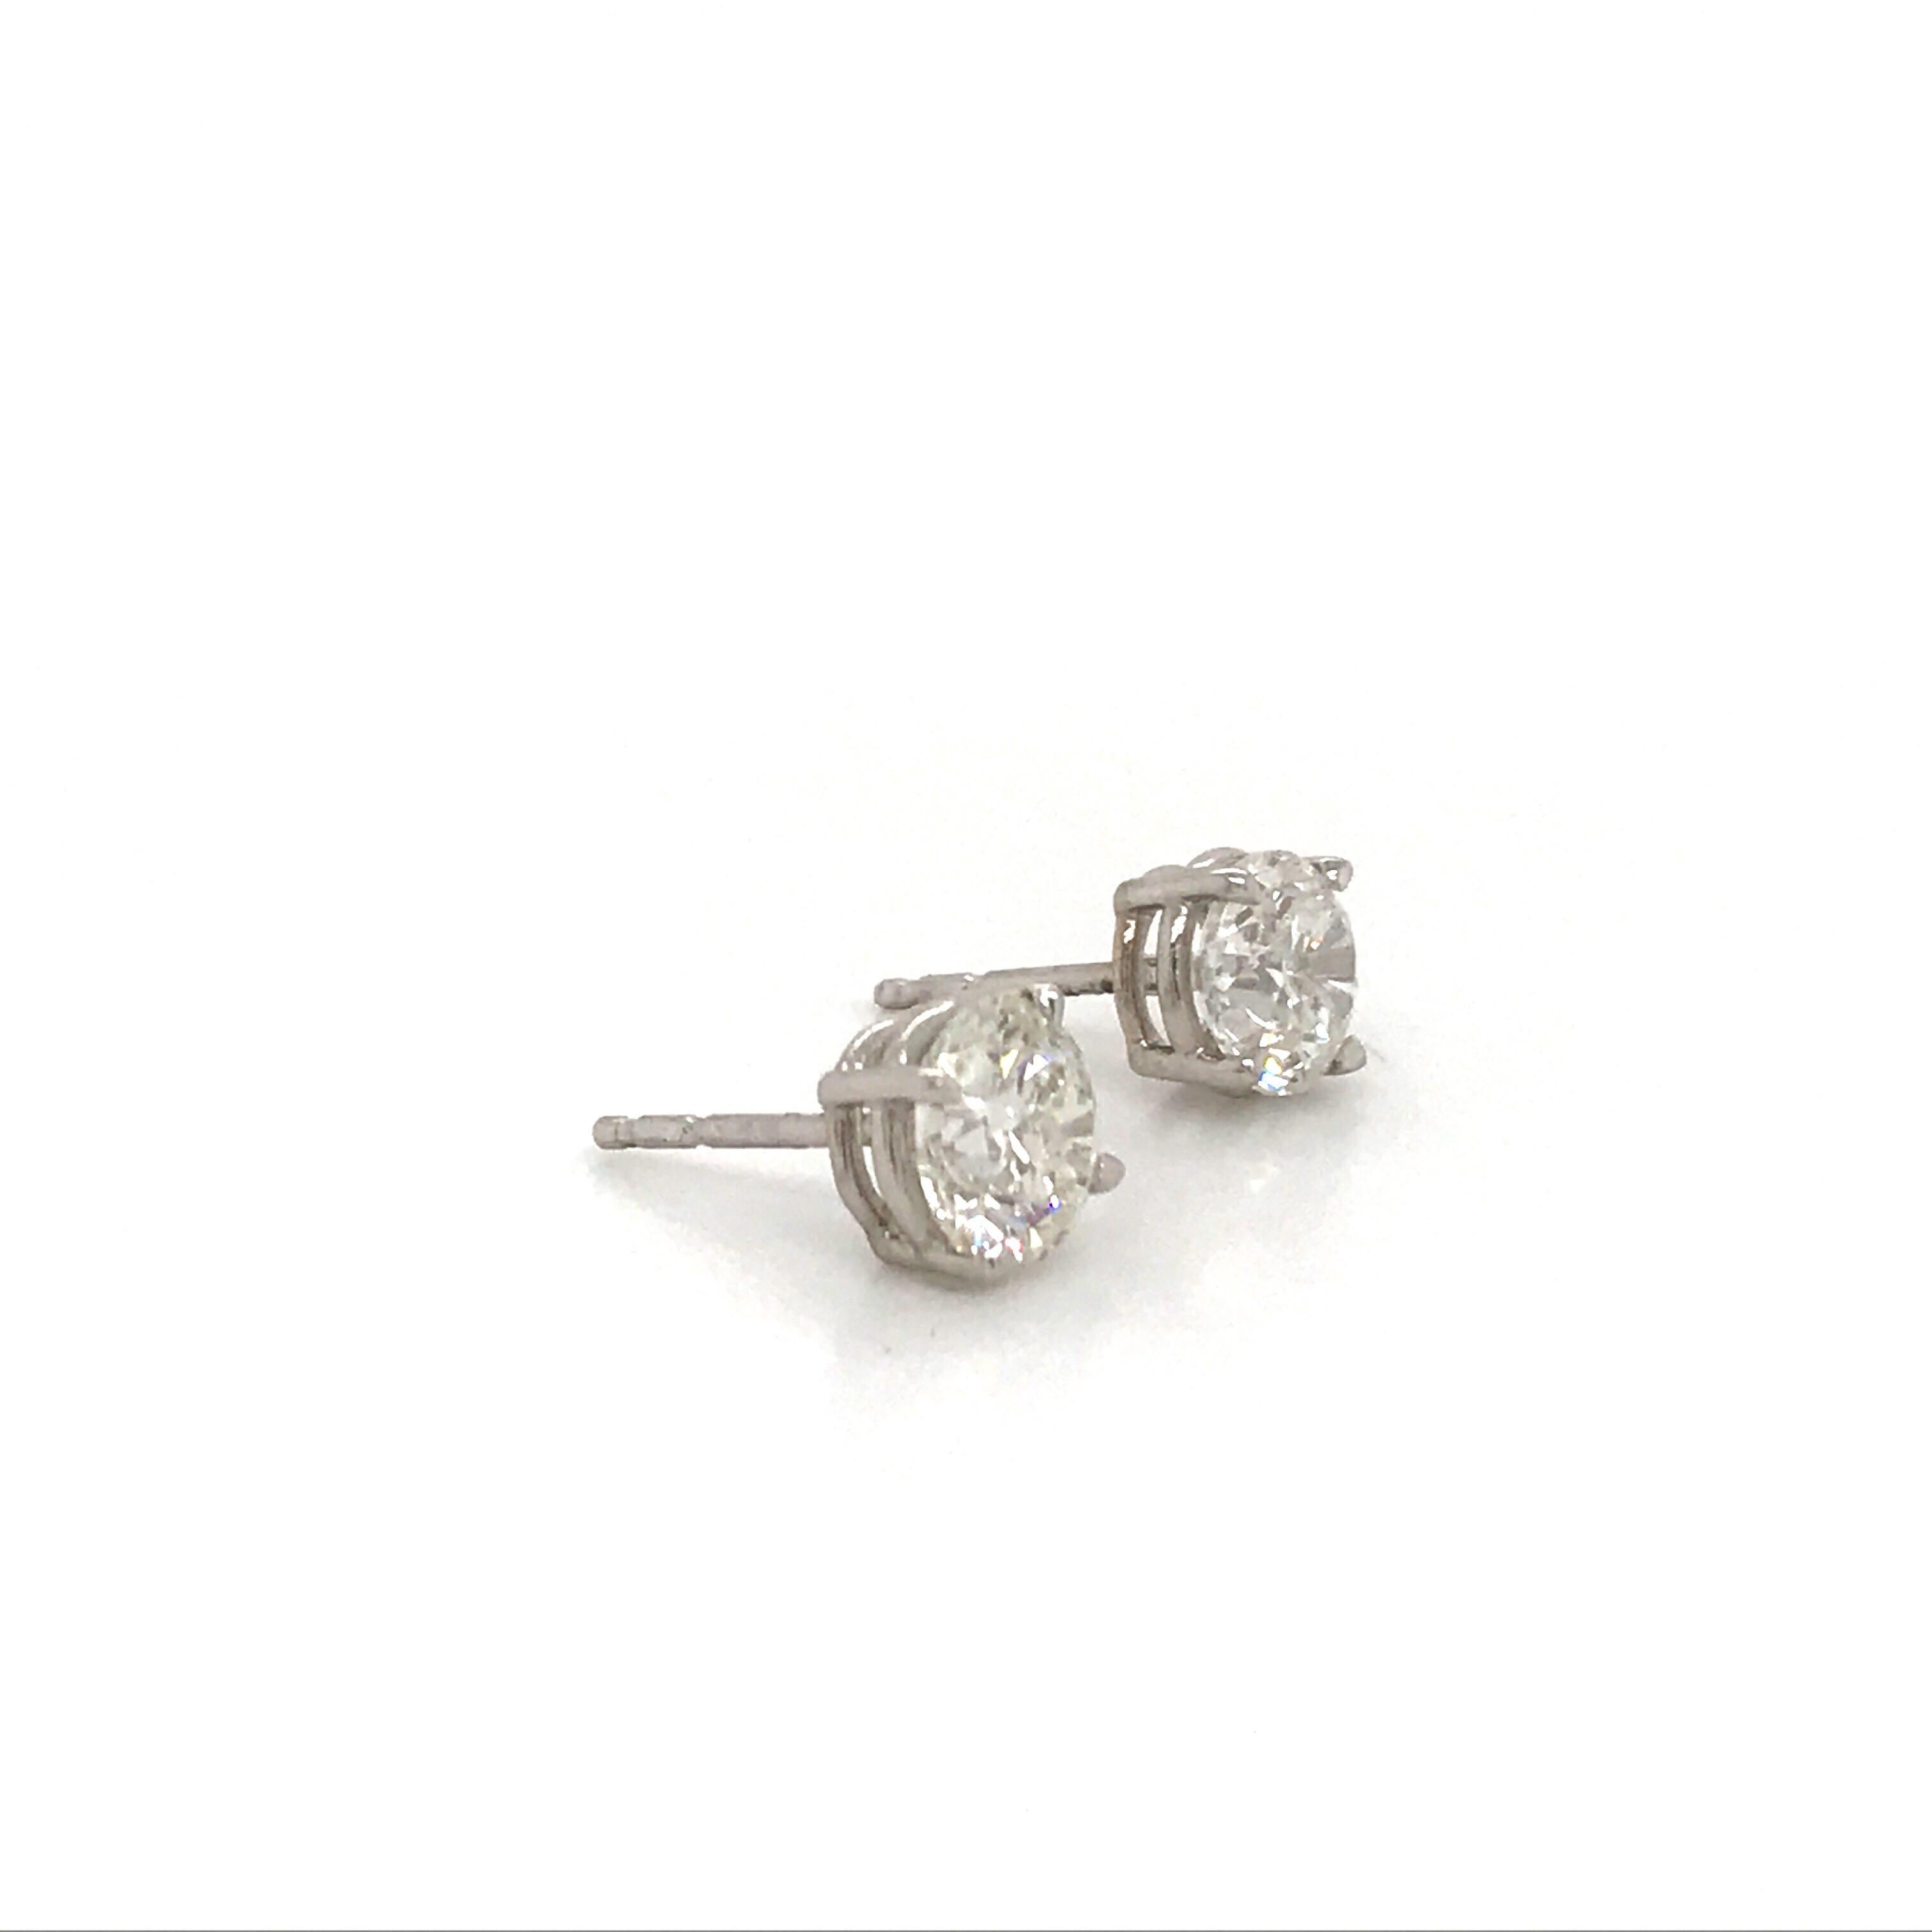 14K White gold diamond stud earrings weighing 2.02 carats in a 4 prong classic setting. 
Color G
Clarity I1-I2